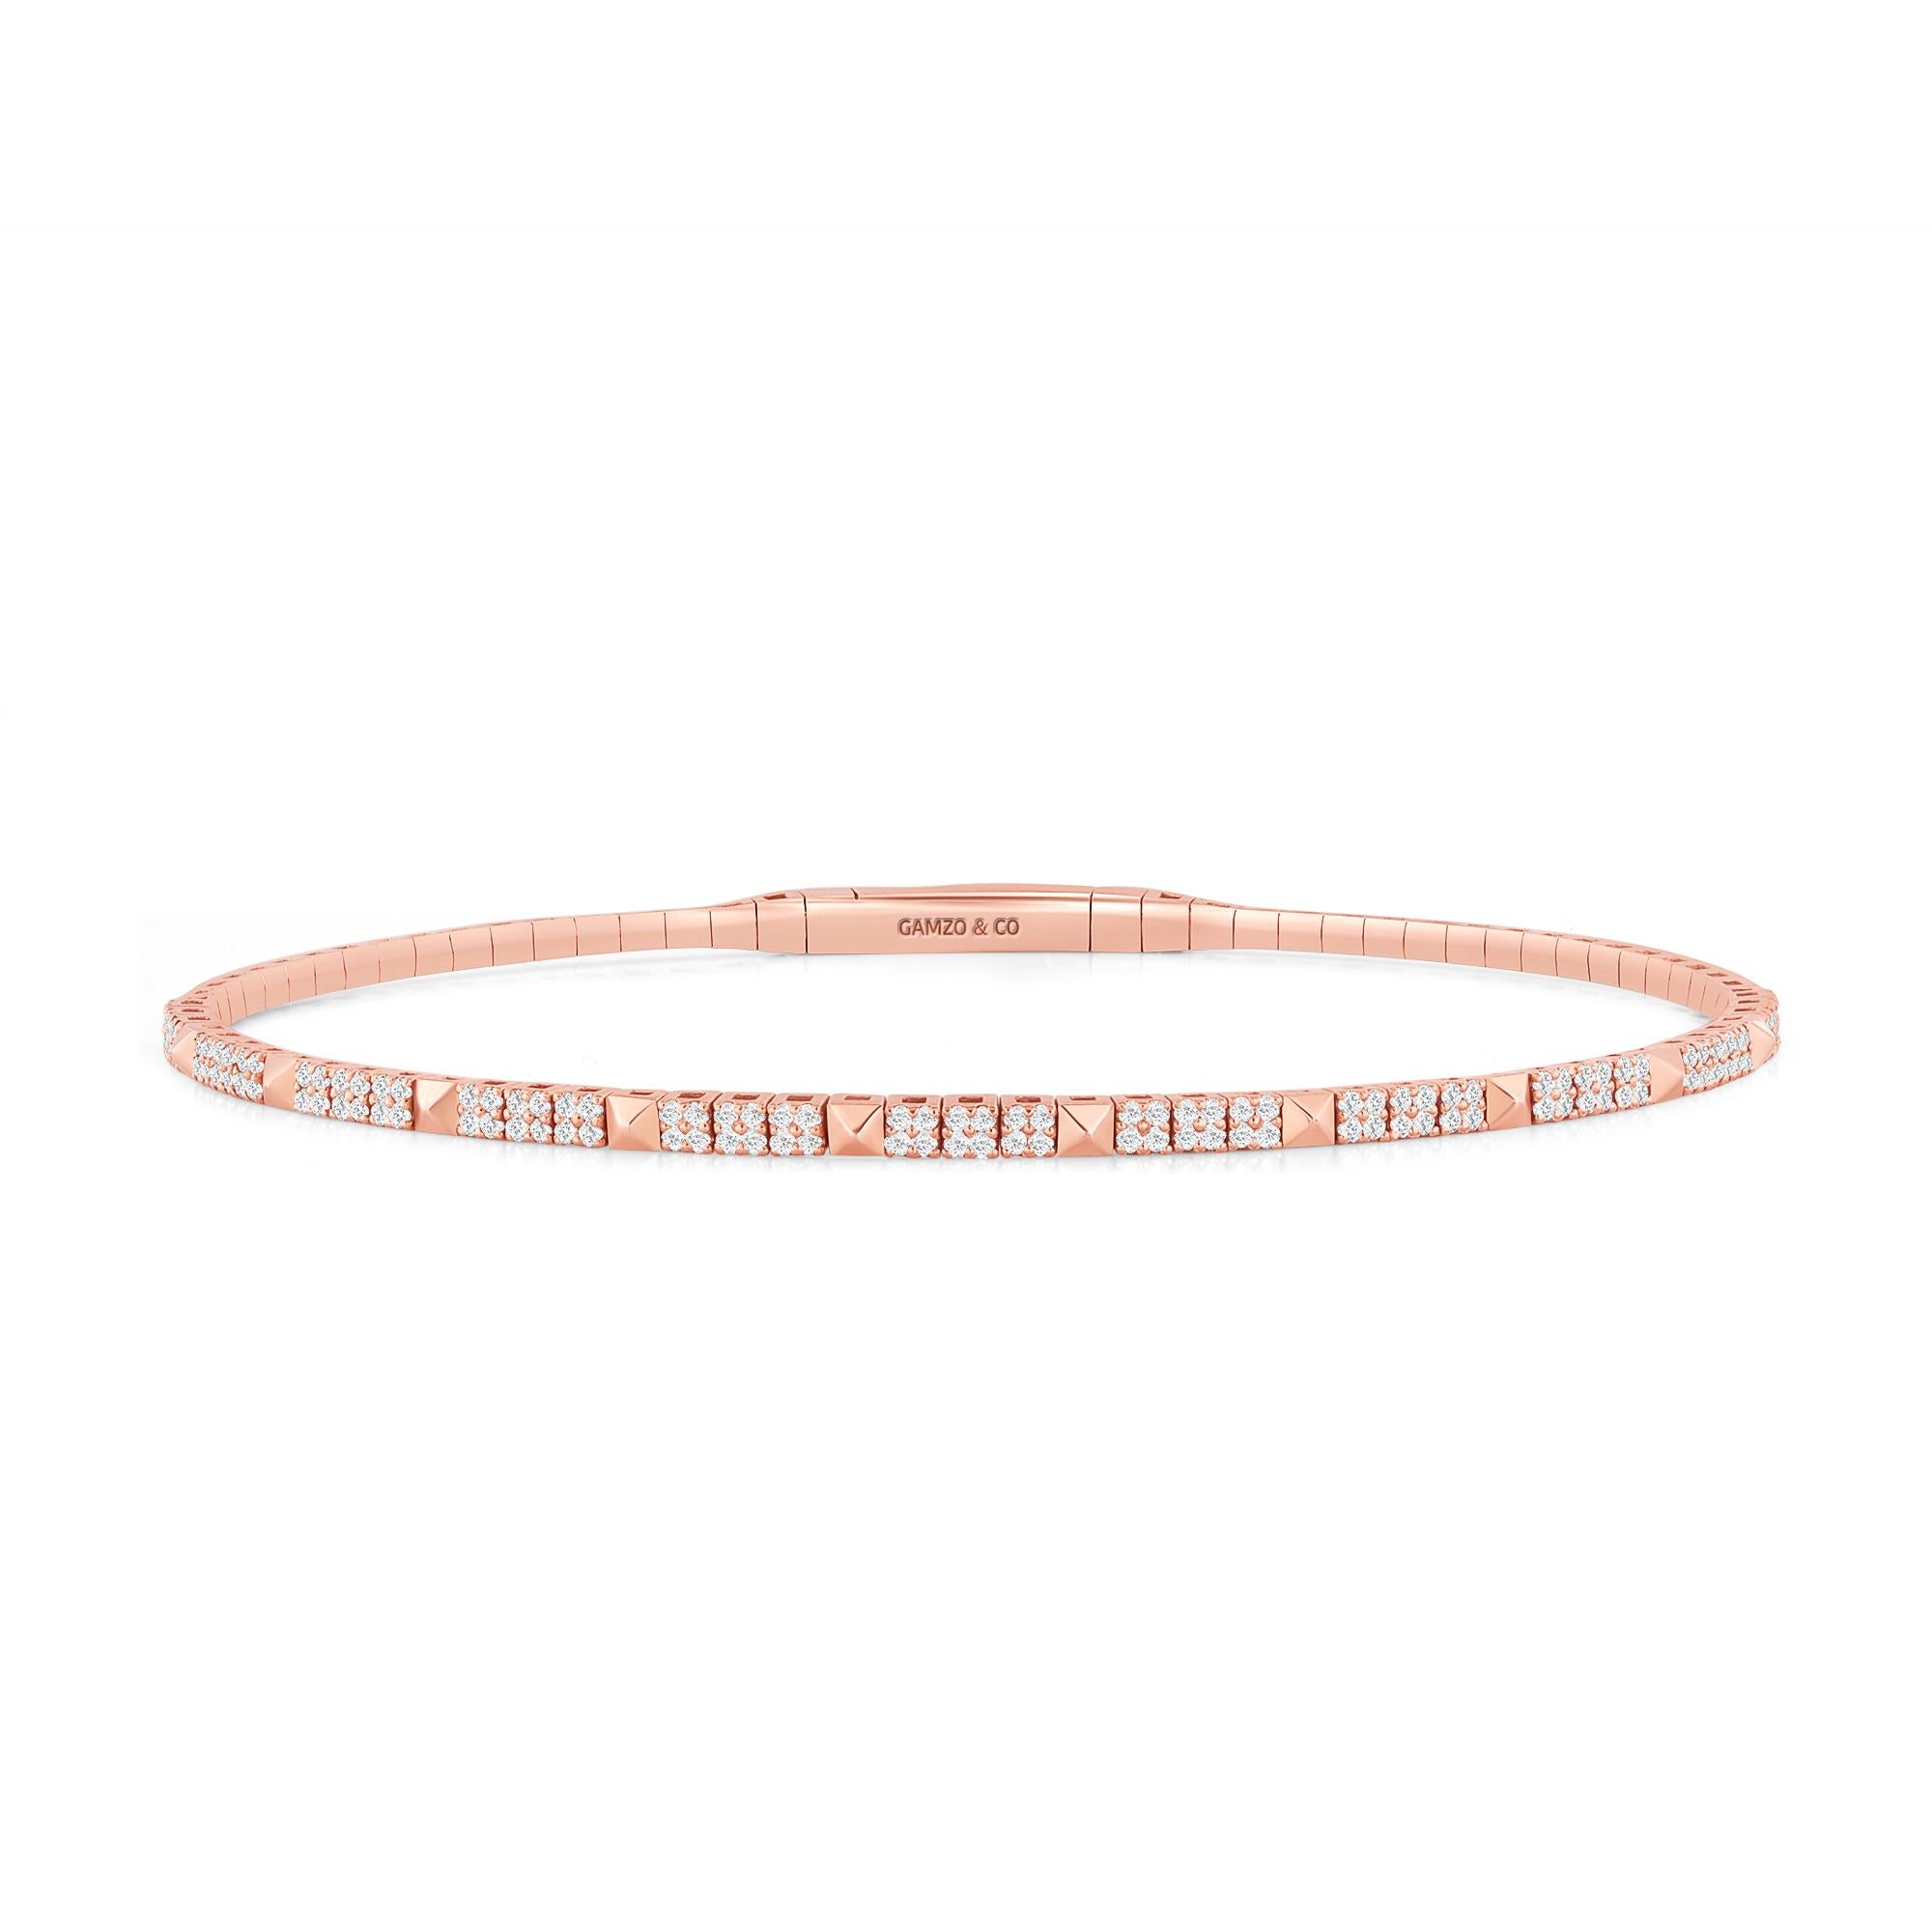 This diamond tennis bangle features beautifully cut round diamonds set gorgeously in 14k gold.

Metal: 14k Gold
Diamond Cut: Round Natural Diamond (Not Lab Grown)
Total Diamond Carats: 0.80 Carats
Diamond Clarity: VS
Diamond Color: F-G
Color: Rose